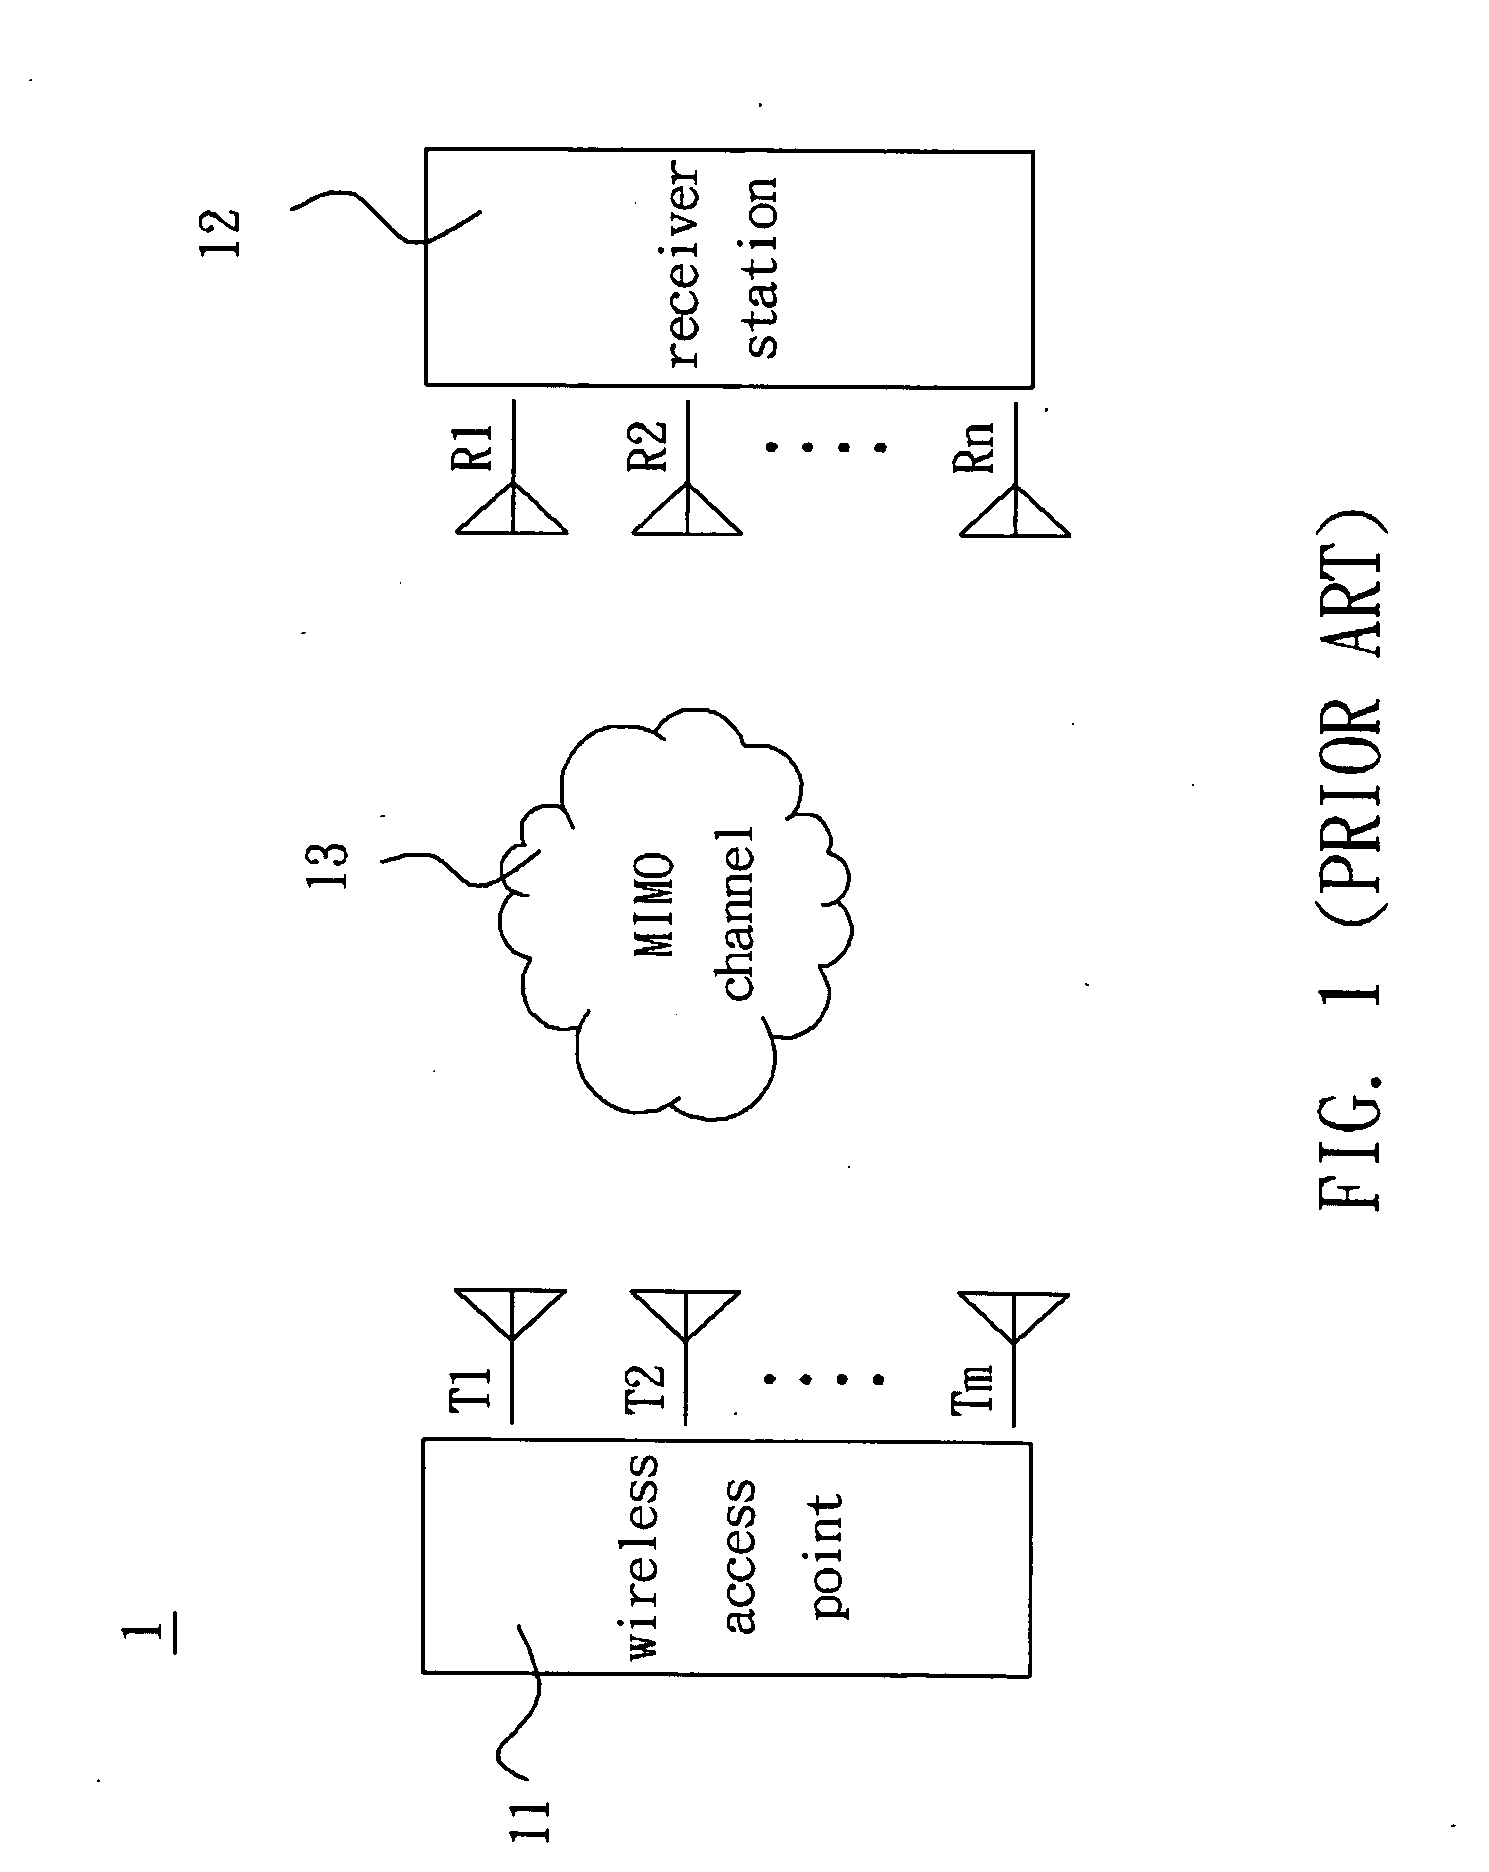 Channel emulating device